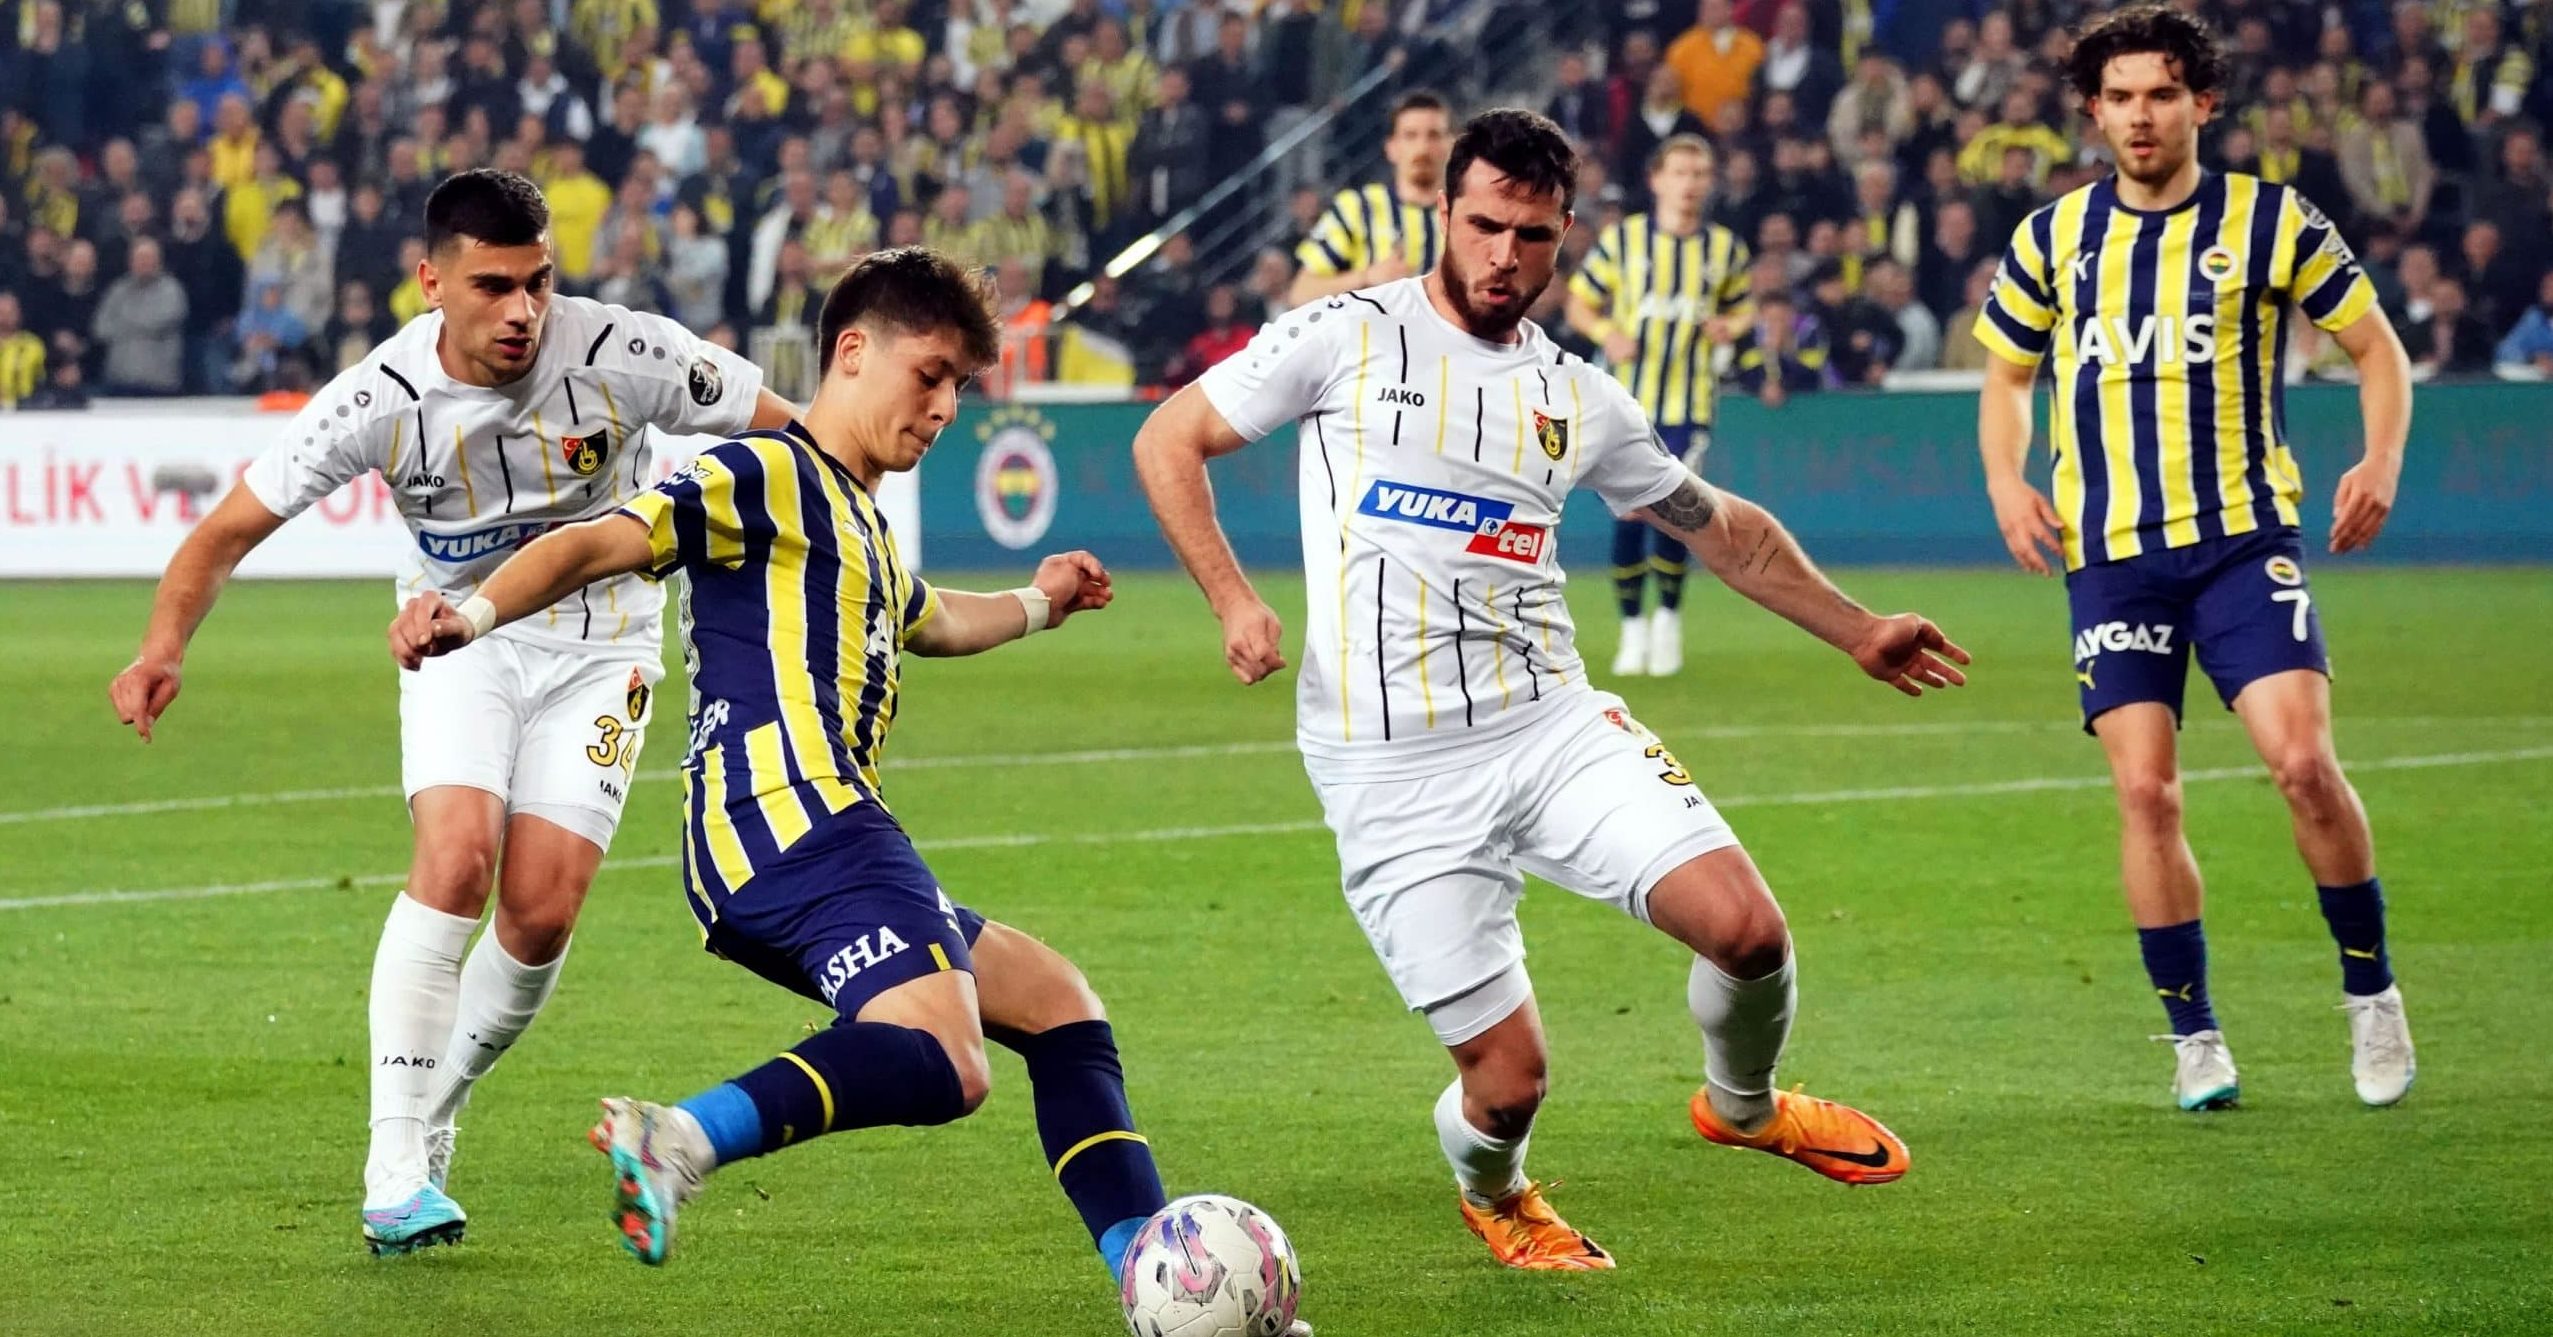 Fenerbahçe vs Zenit: An Exciting Clash of Football Giants